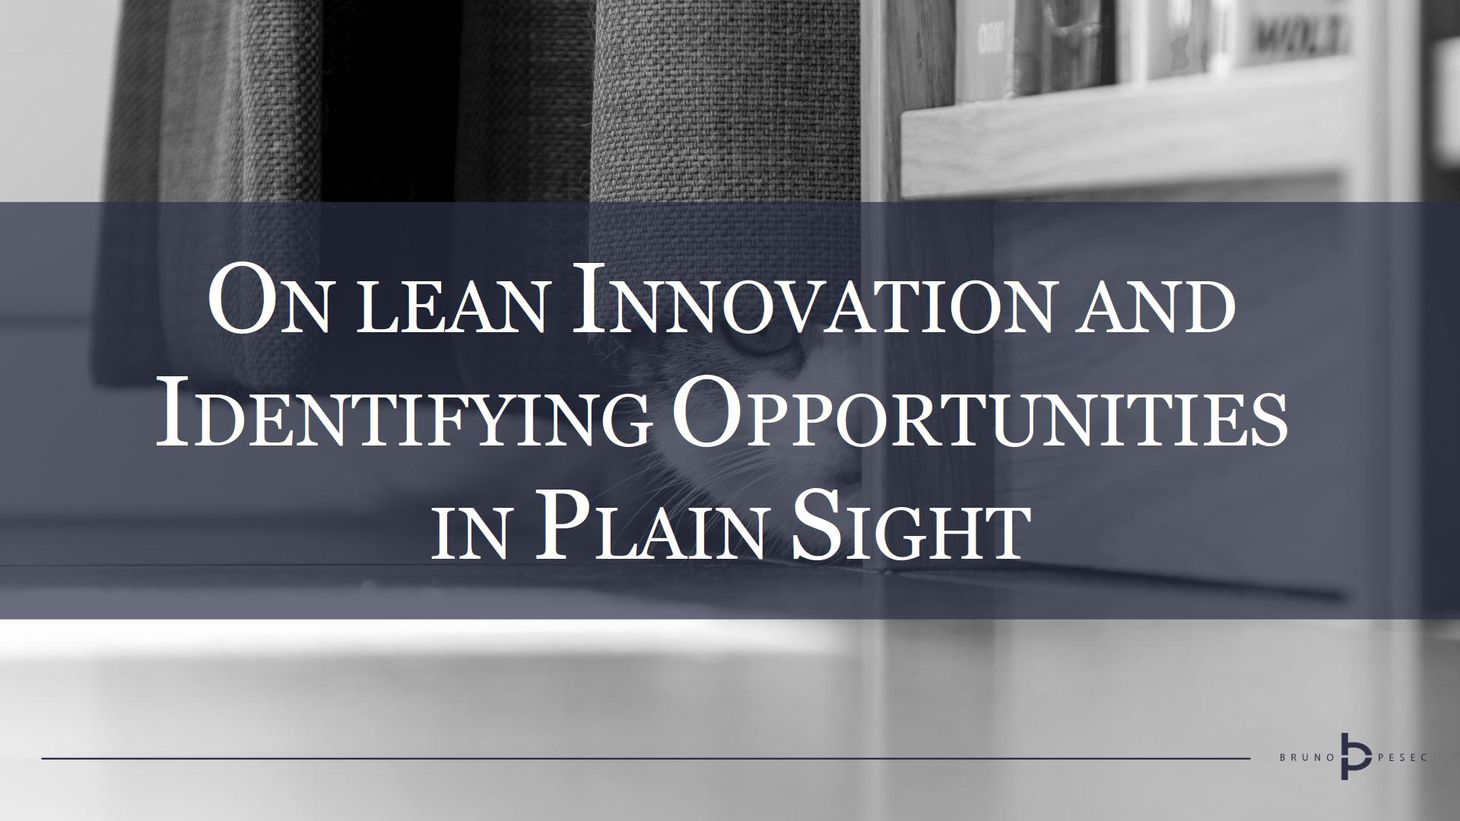 On lean innovation and identifying opportunities in plain sight